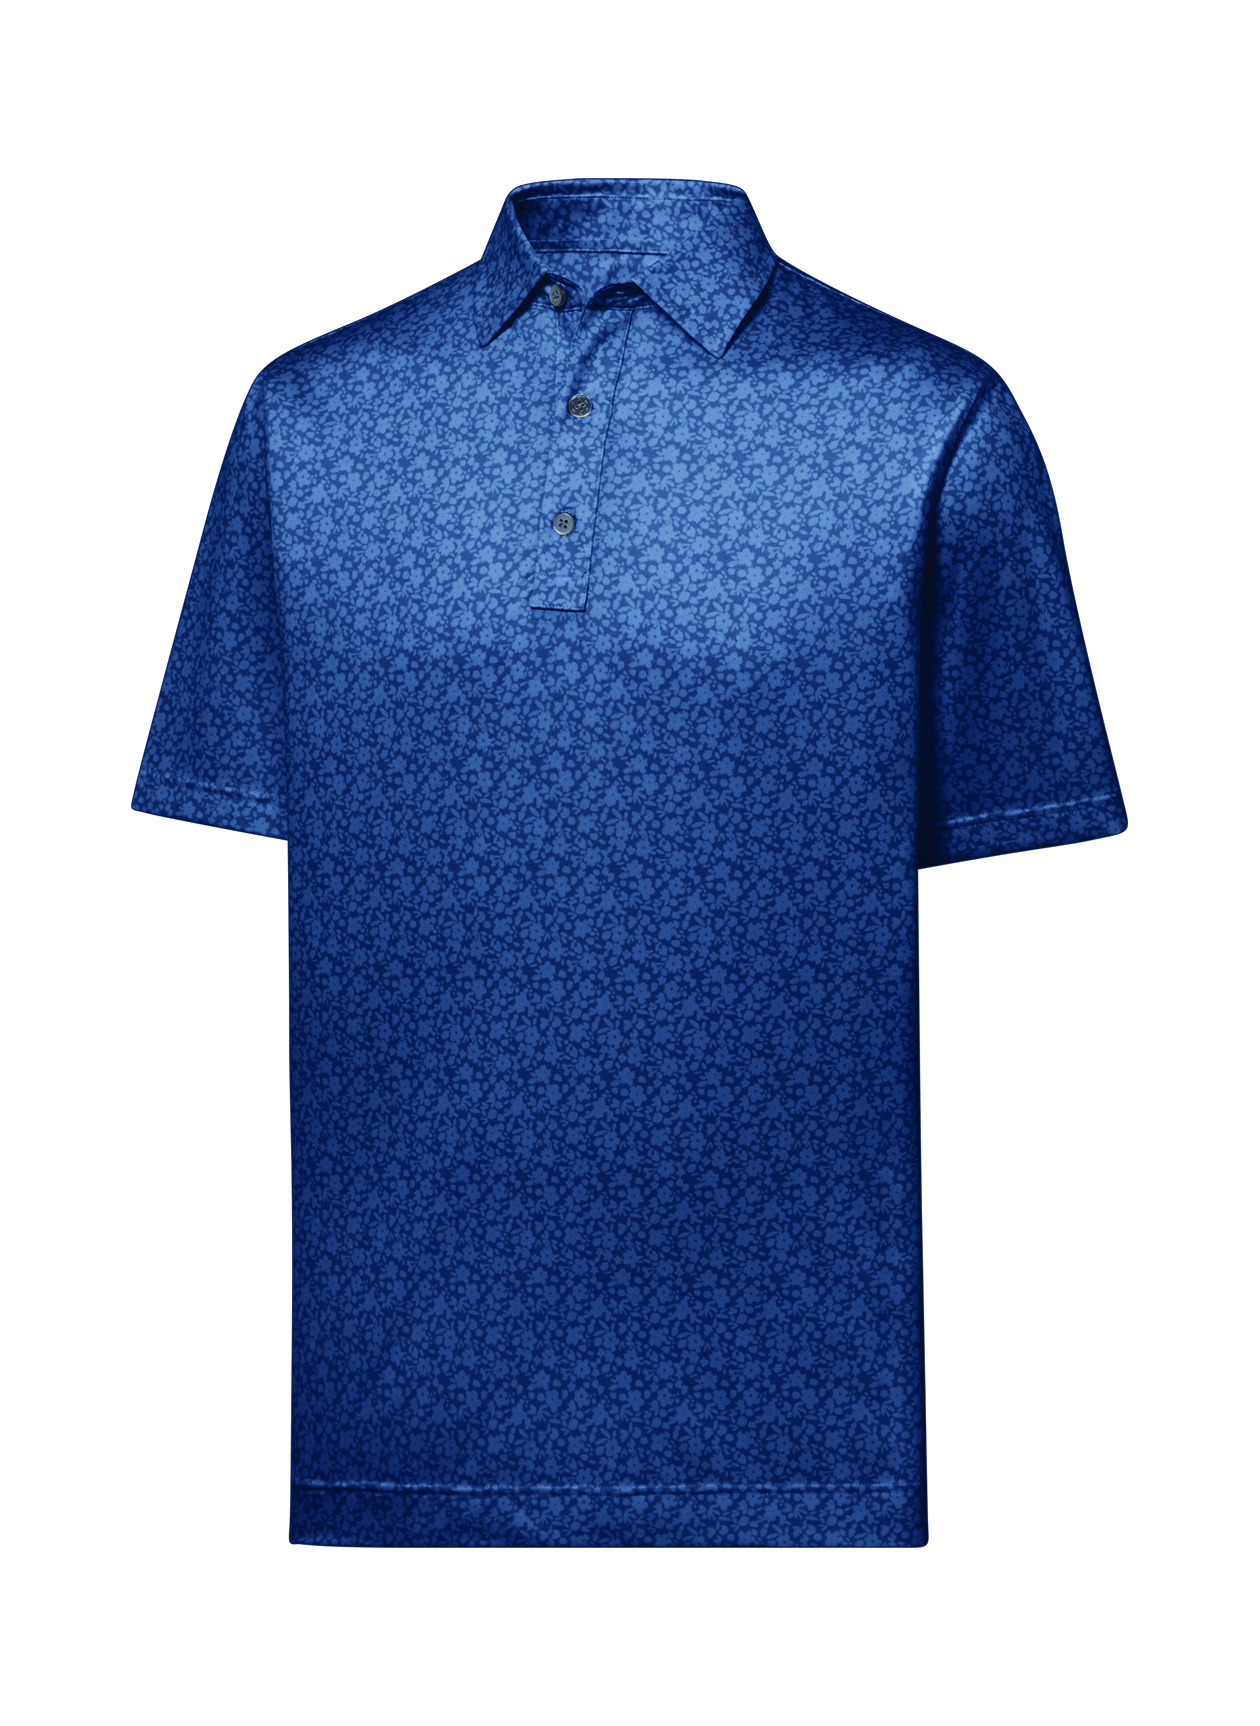 FootJoy Men's Navy Painted Floral Lisle Polo